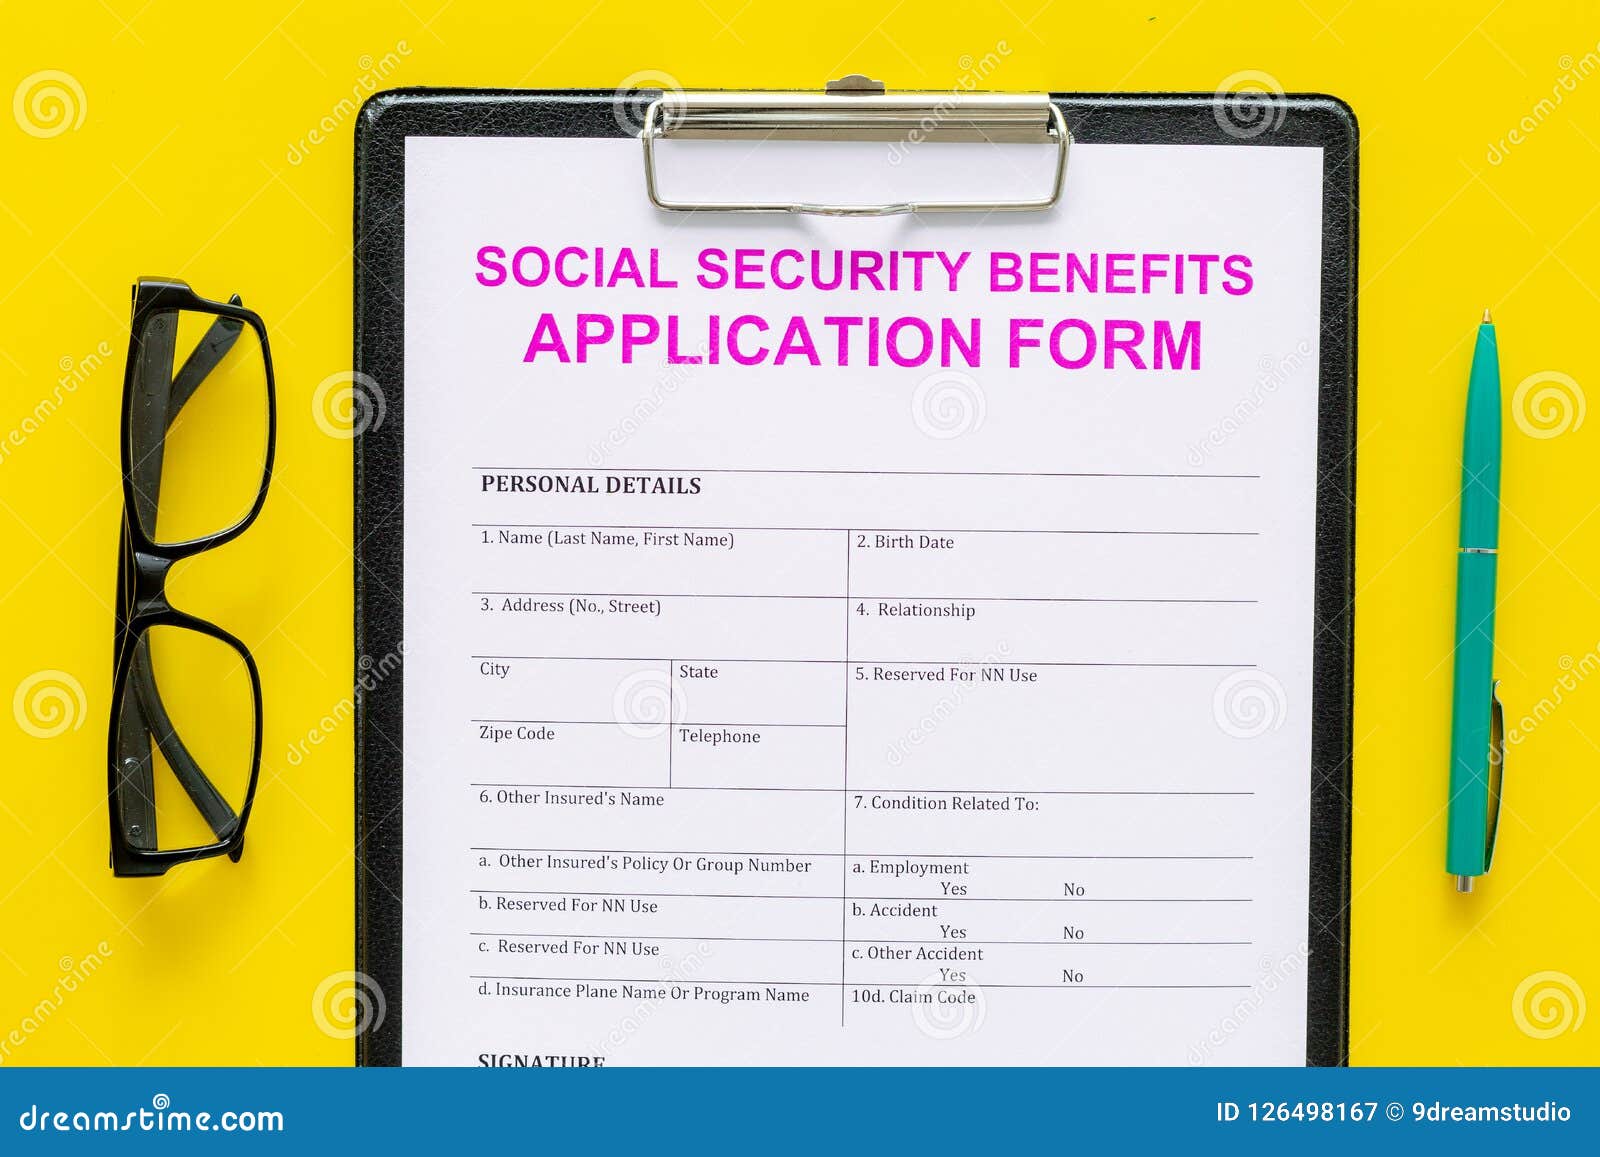 apply social security benefits